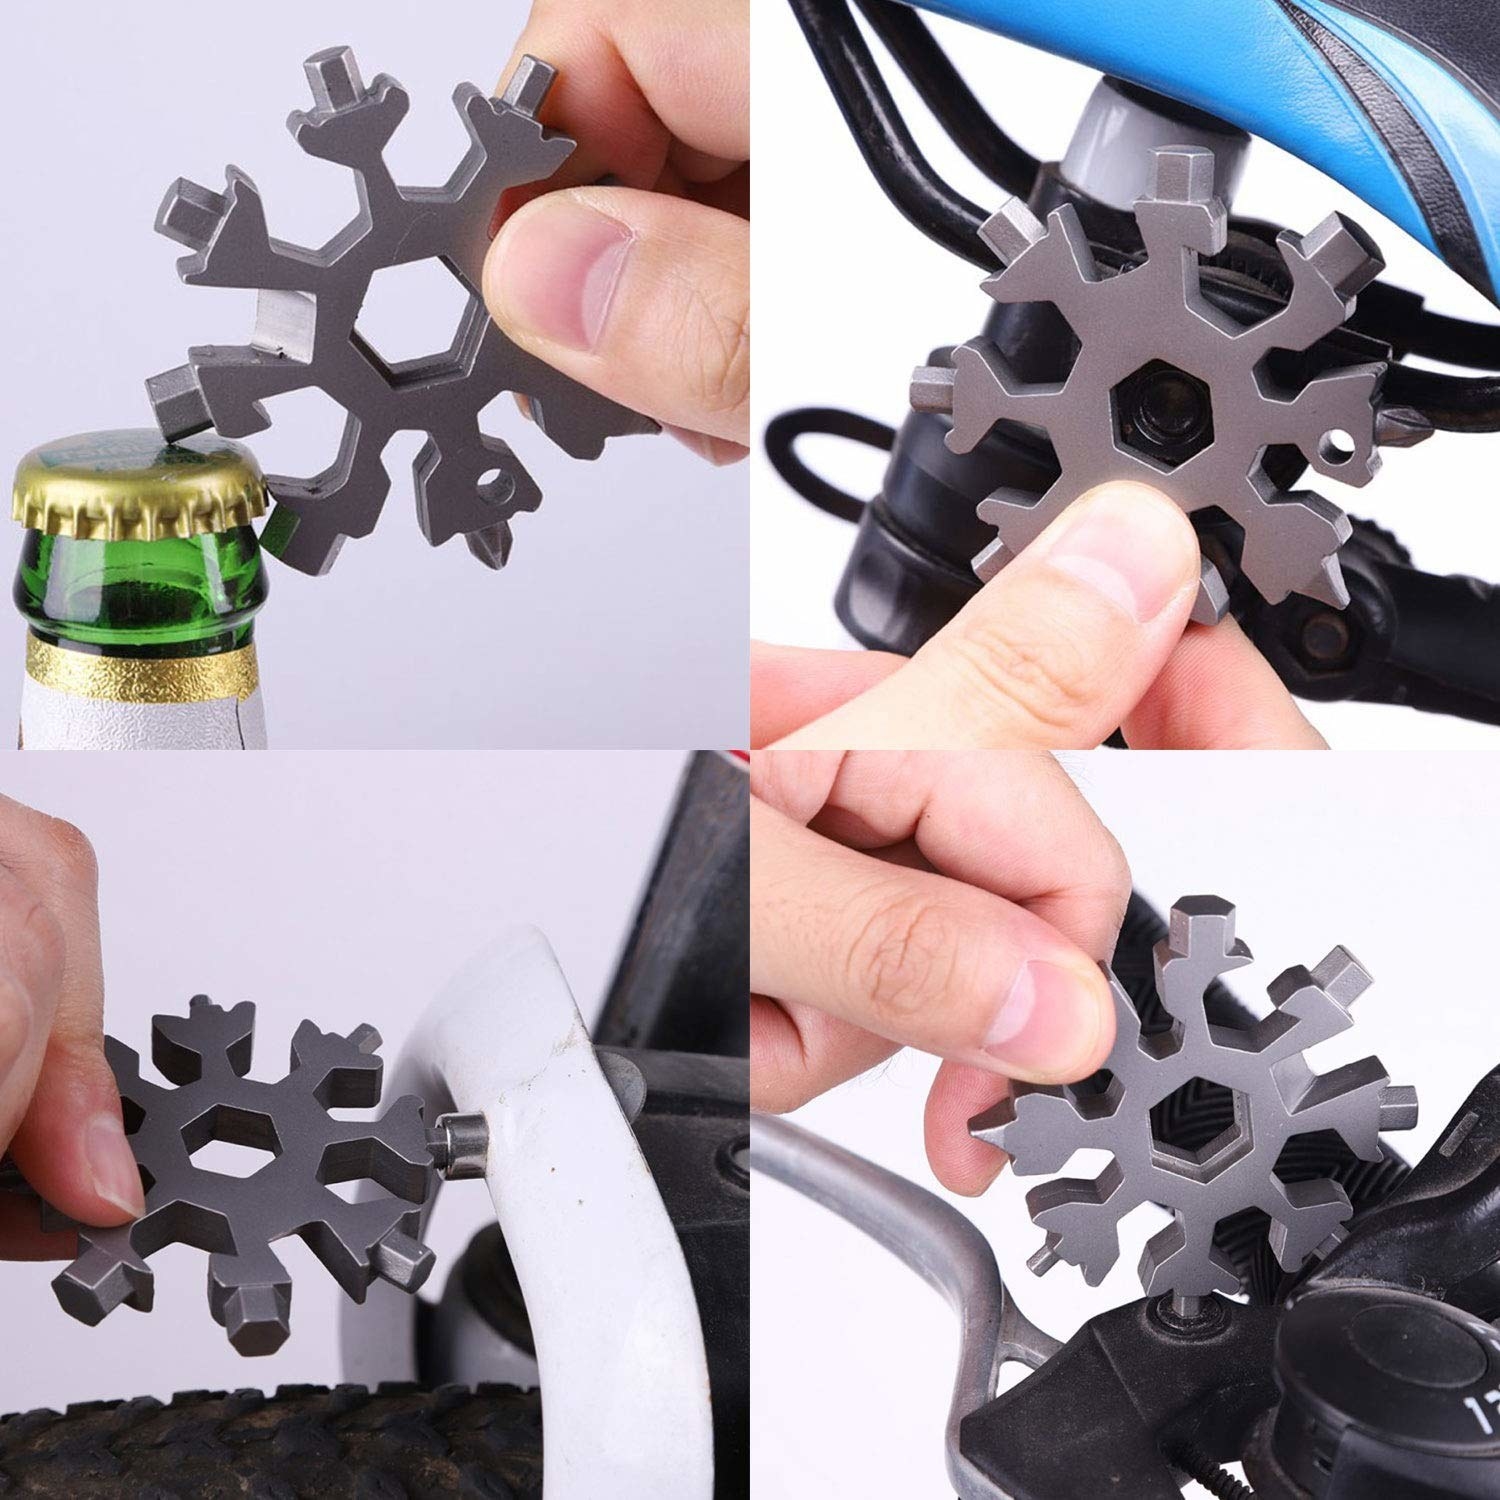 Four images of a person using the tool to fix and open things